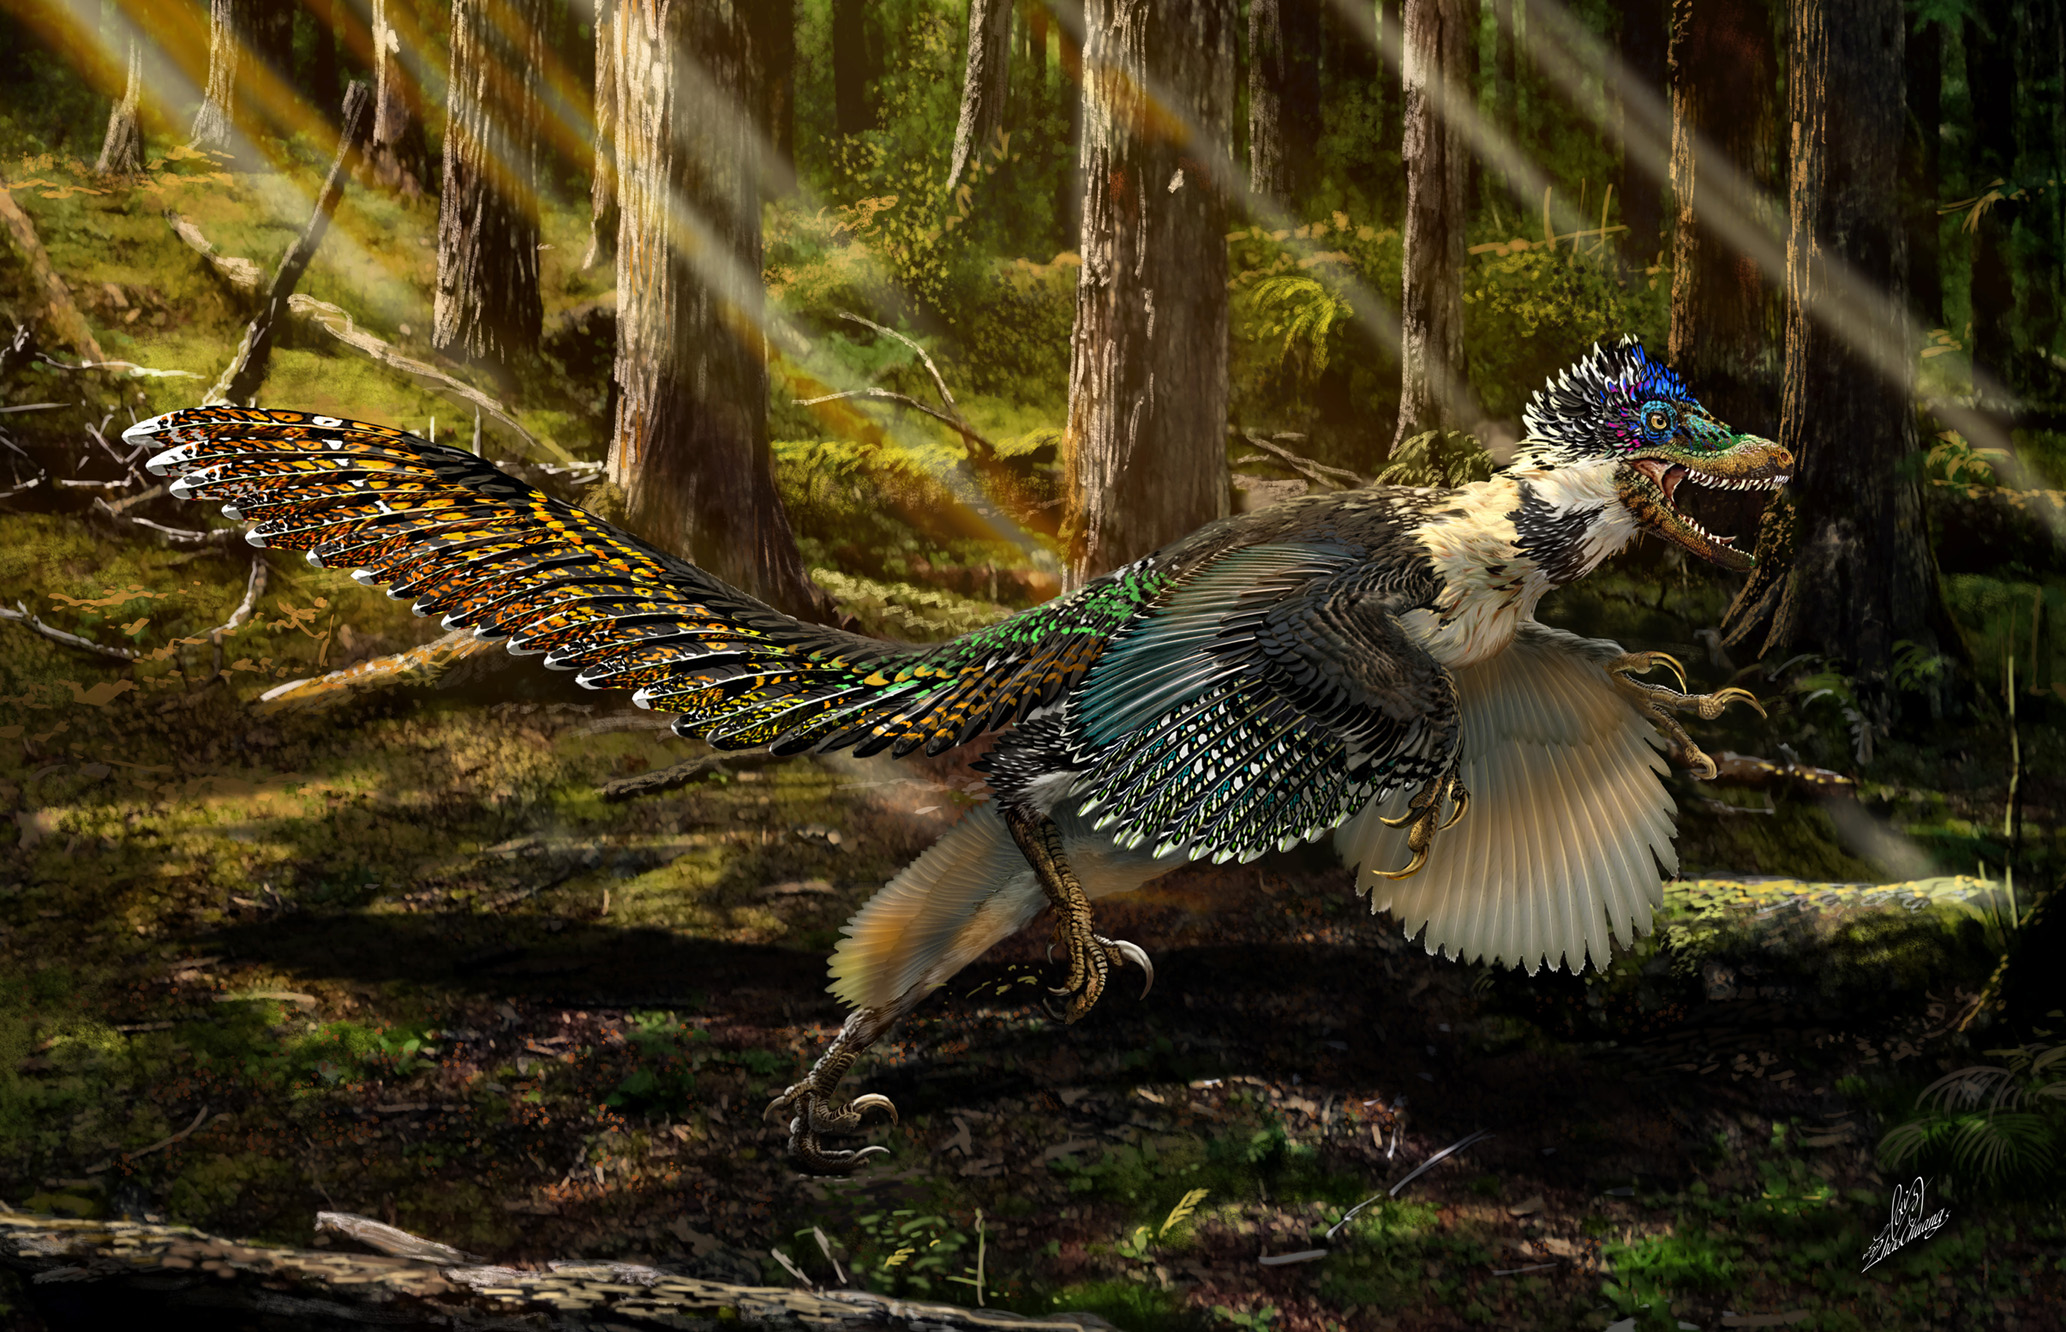 This Is How Jurassic World’s Velociraptors Should Have Looked